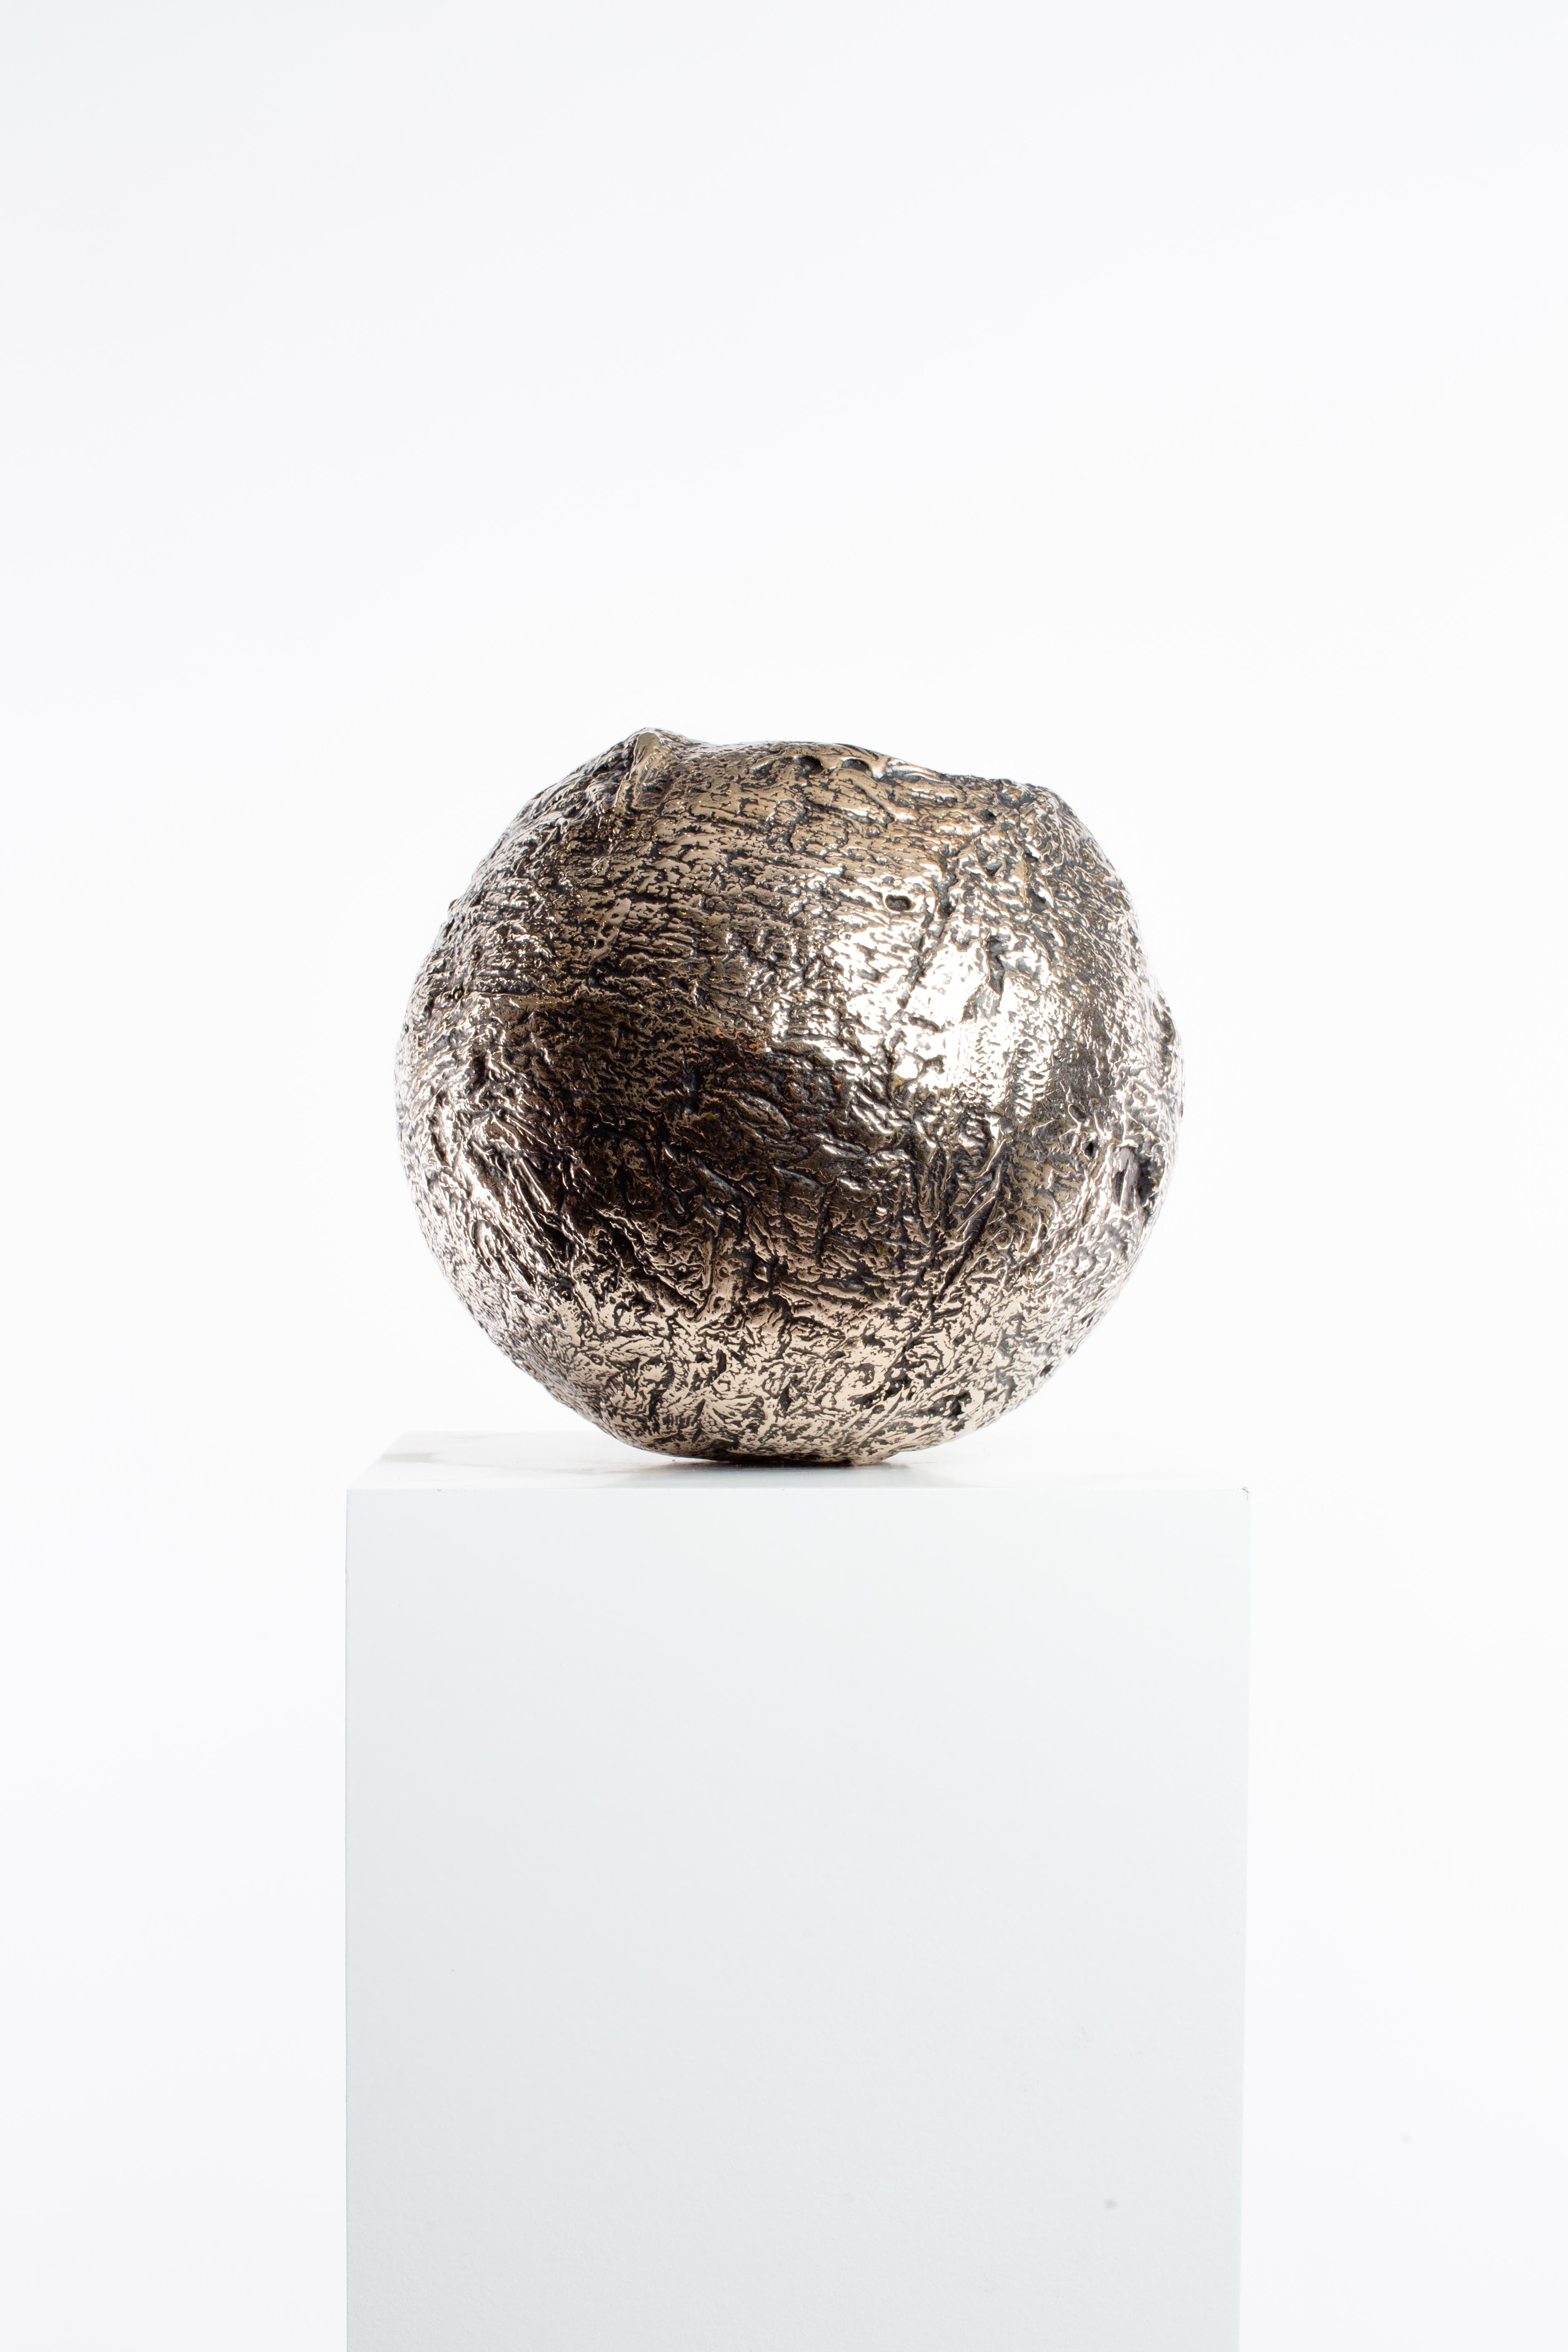 Born in Johannesburg in 1991, sculptor Driaan Claassen first studied 3D animation before apprenticing with Otto du Plessis, artist and founder of Bronze Age Foundry. Claassen is currently based in Cape Town, where he opened his own design and fine